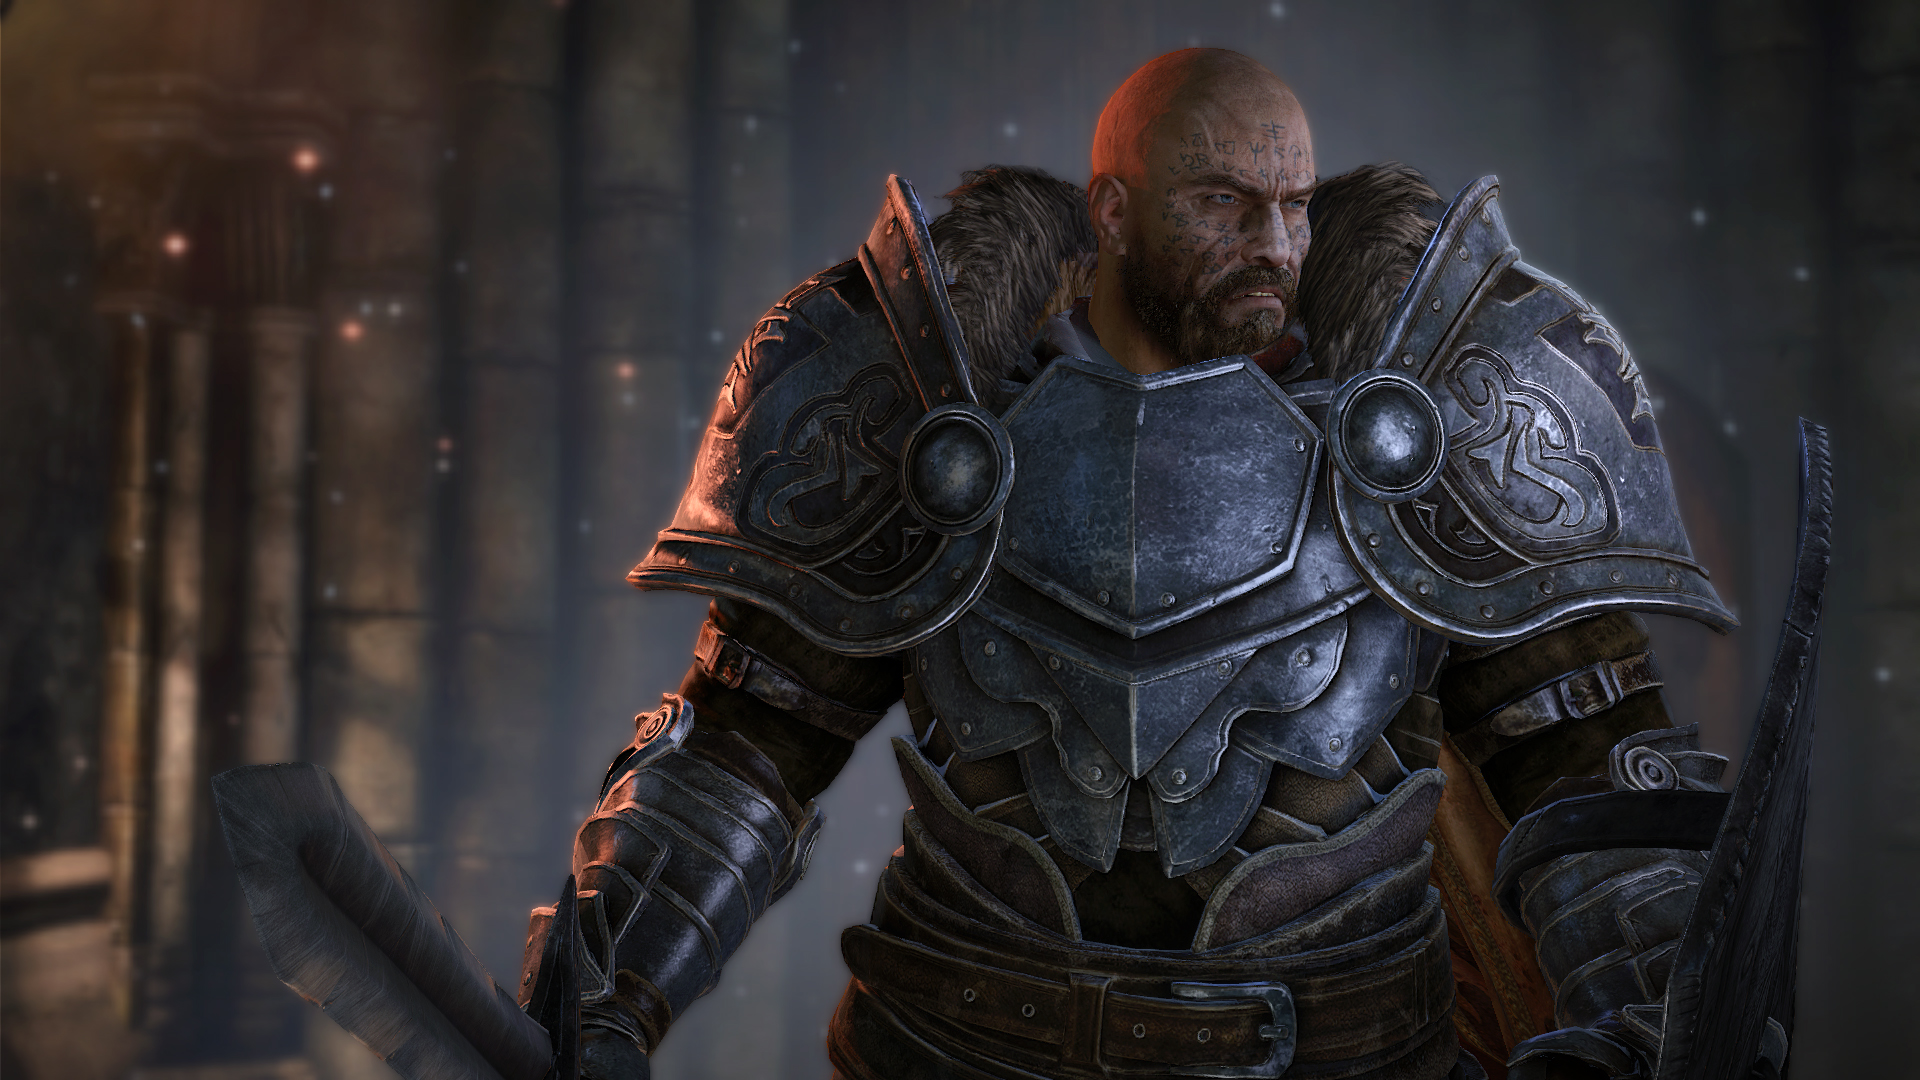 Comprar Lords of the Fallen Steam